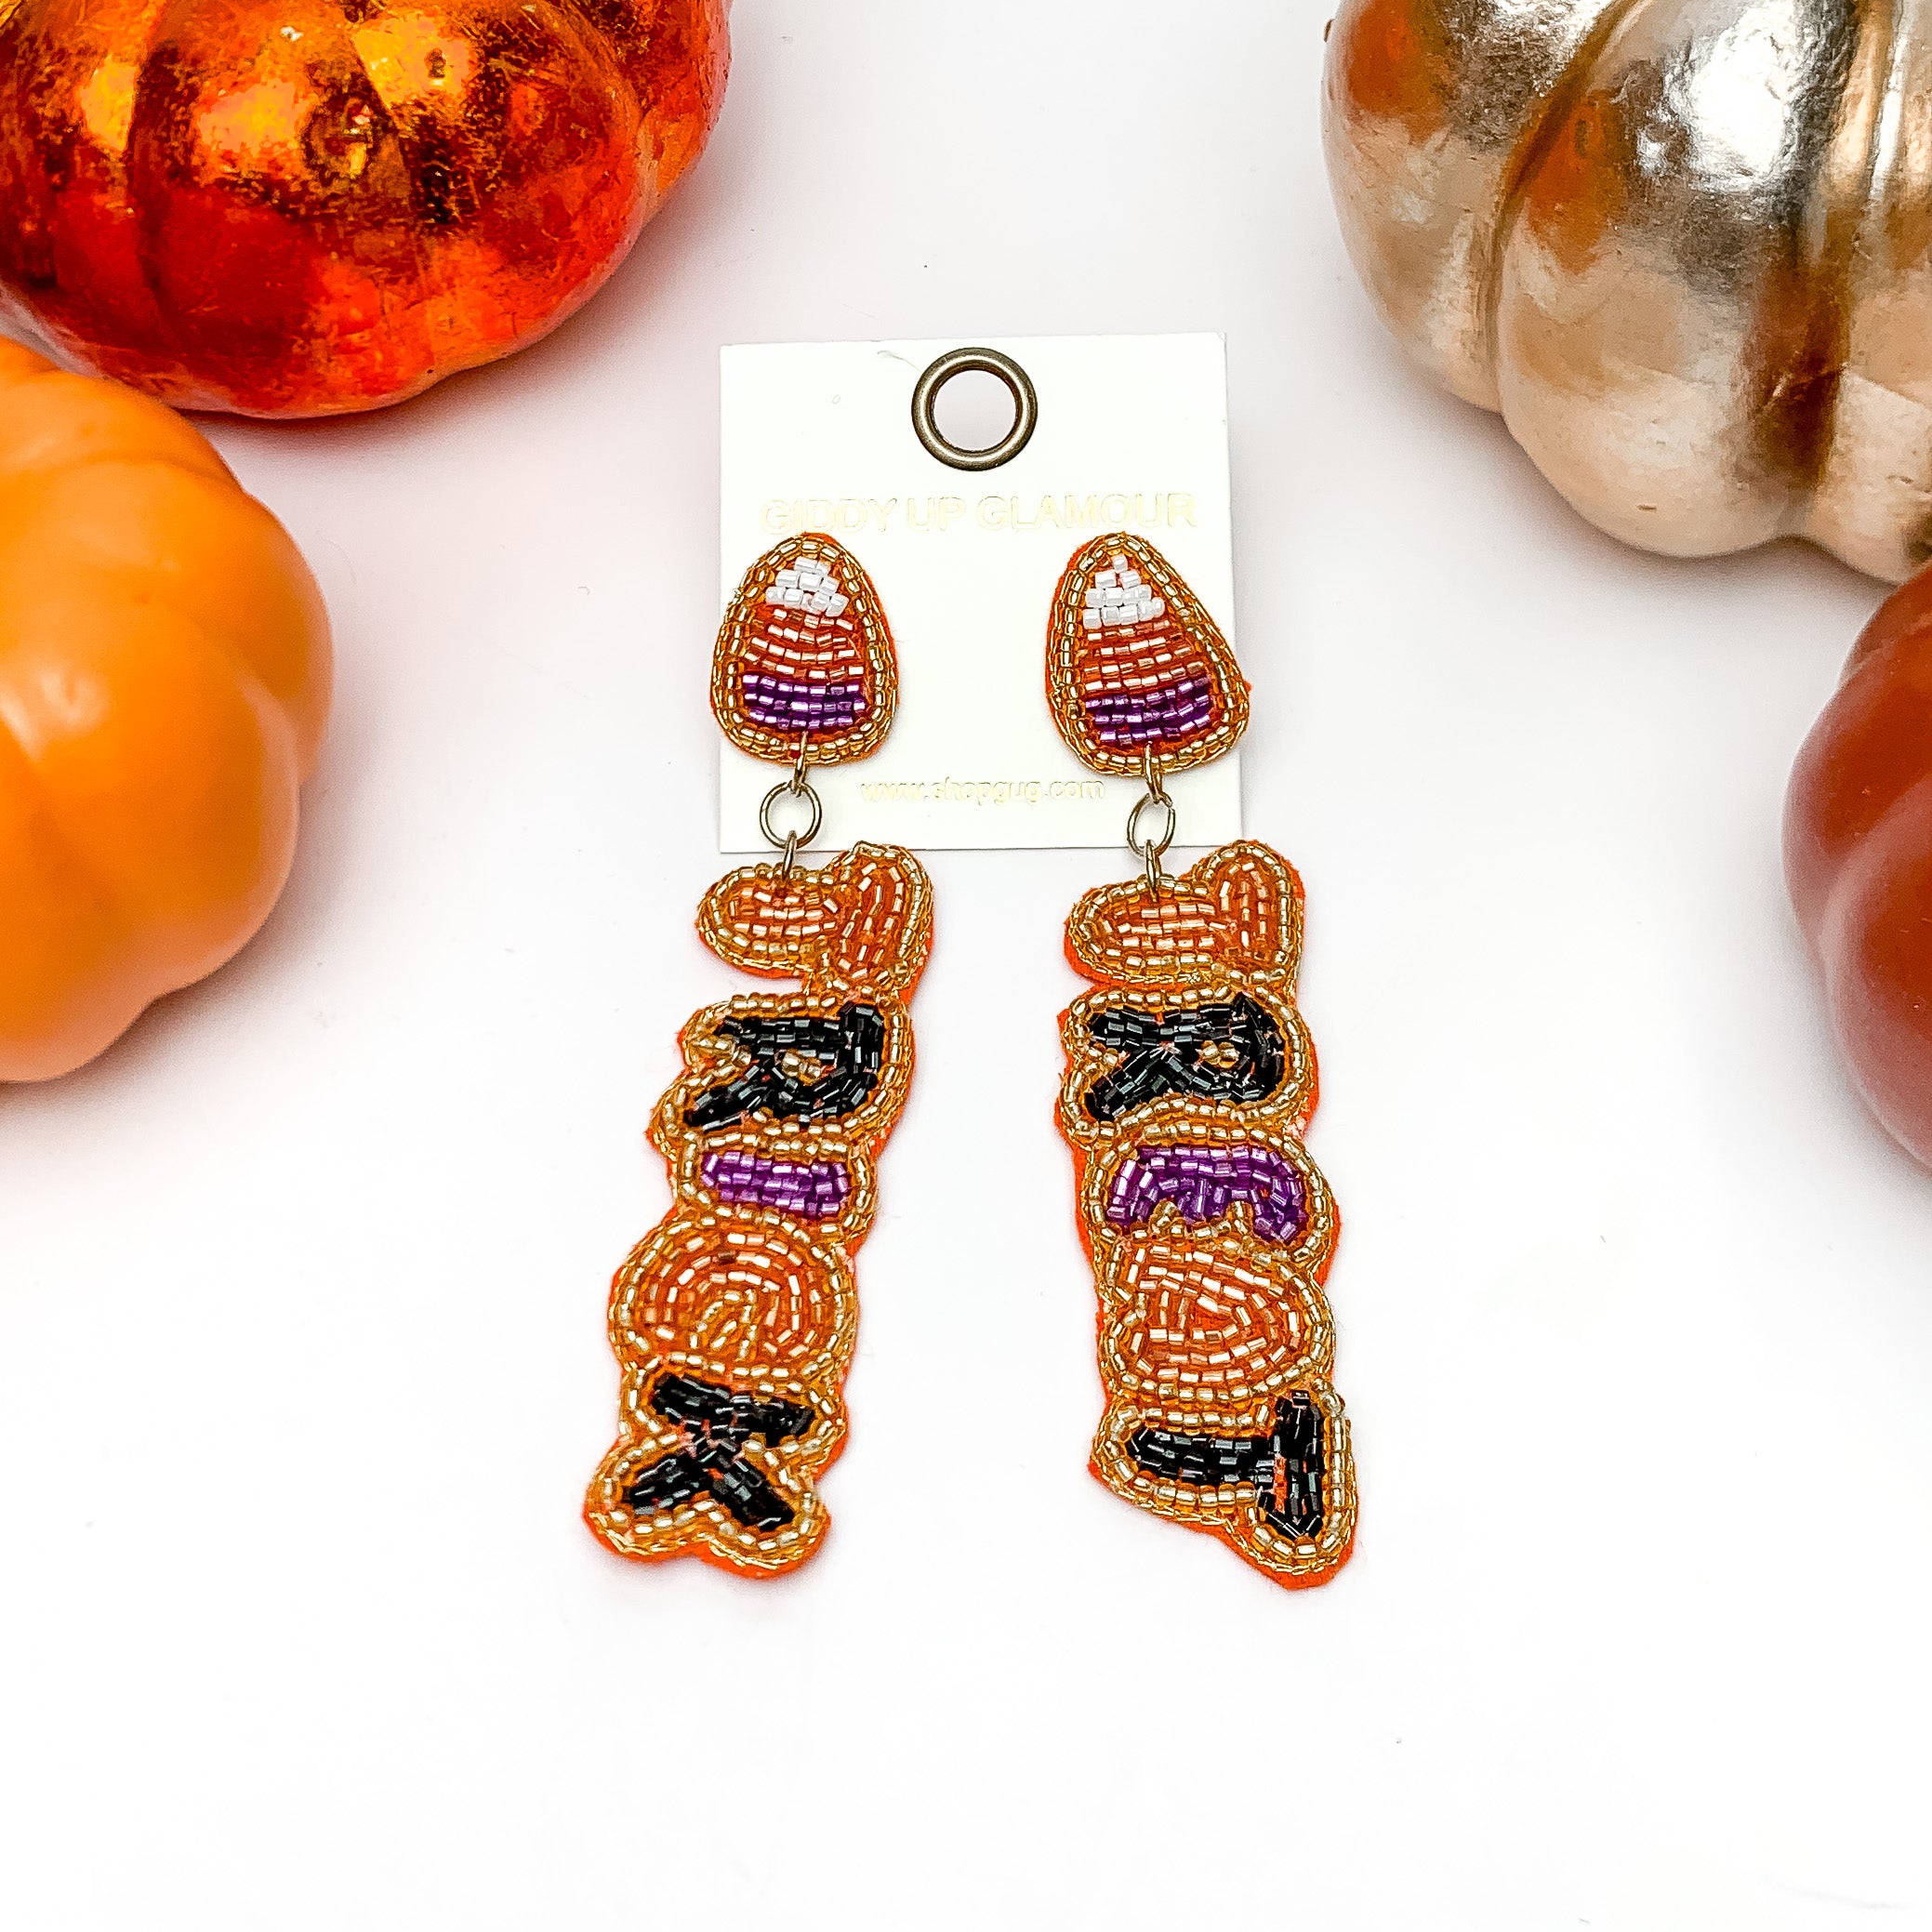 Trick or Treat Halloween Beaded Earrings in Orange, Purple, and Black. These earrings are on a white background with orange and silver pumpkins around them.